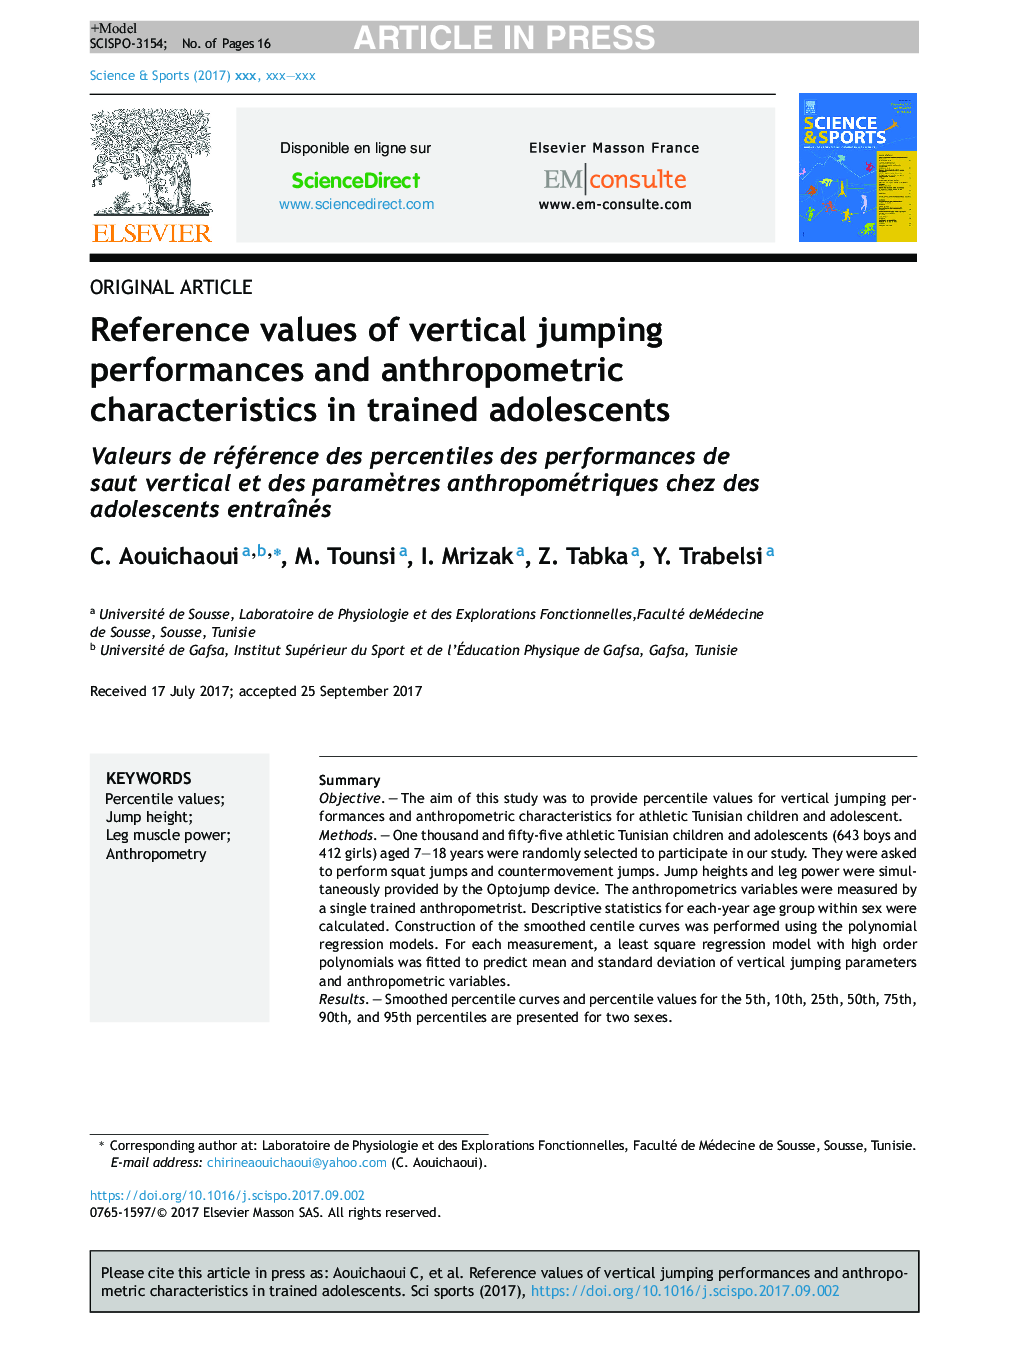 Reference values of vertical jumping performances and anthropometric characteristics in trained adolescents